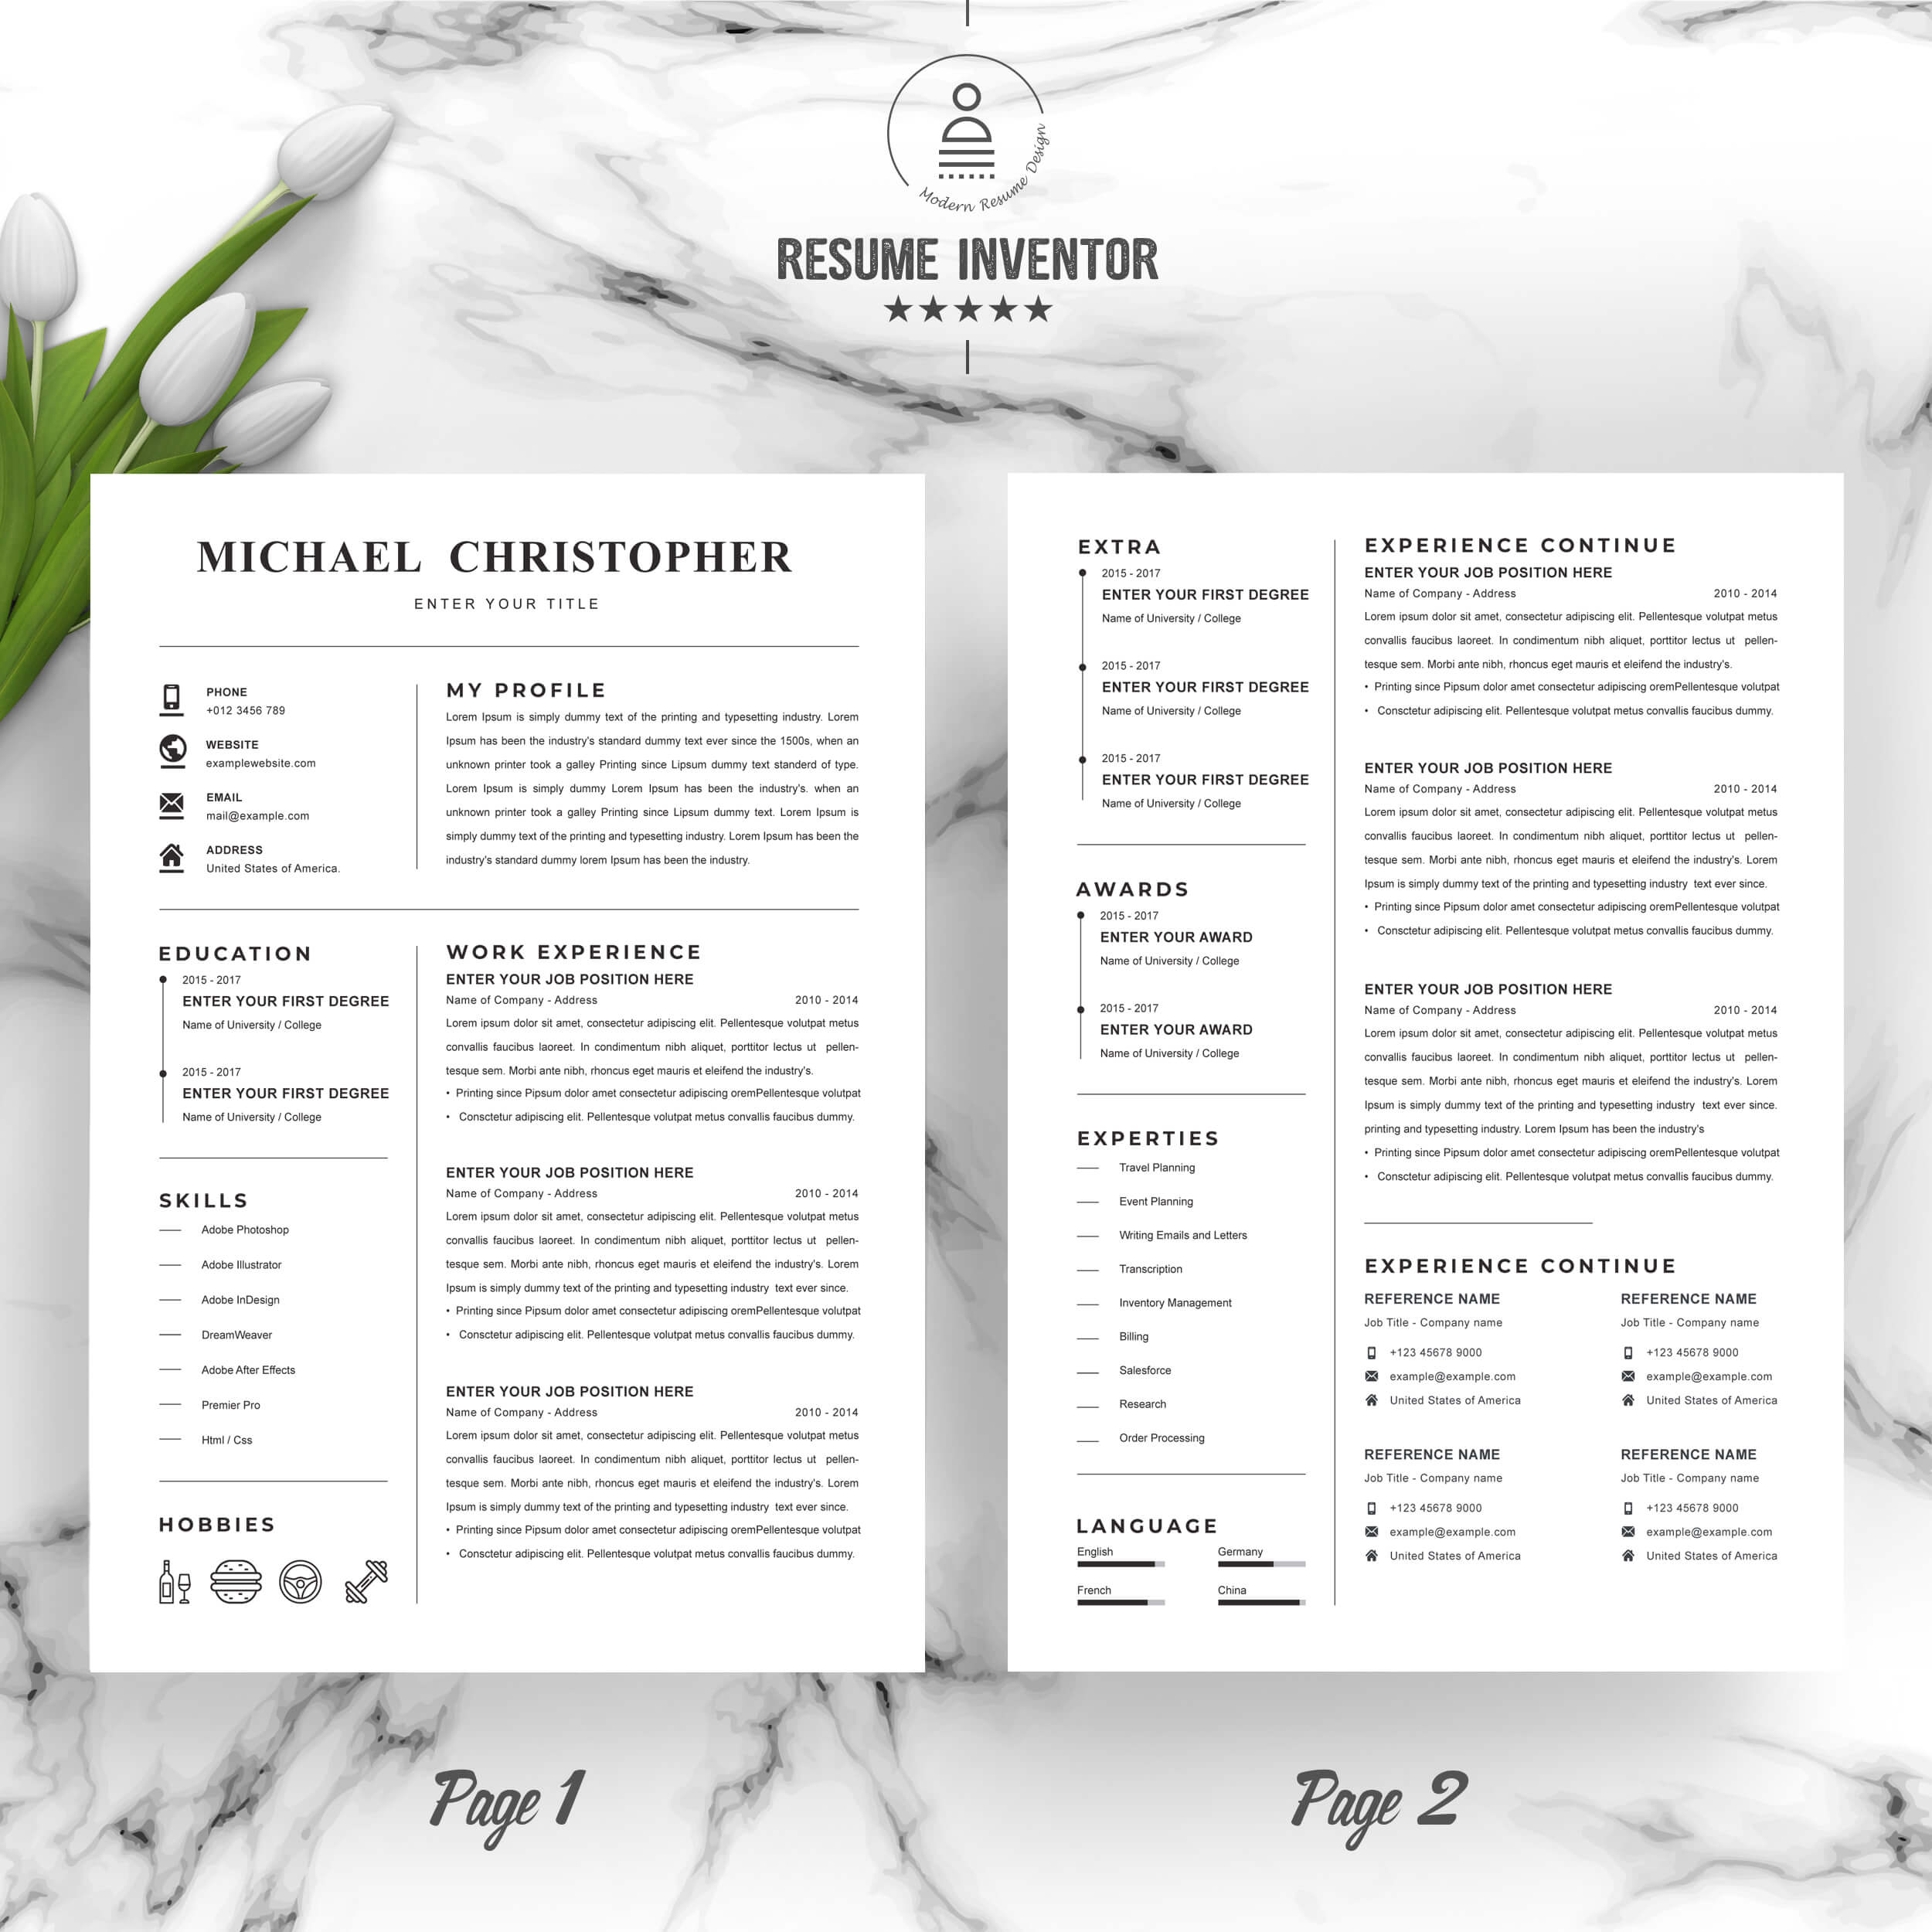 Clean Resume Template | Simple Resume Template Download in Word PSD AI Formats preview image.